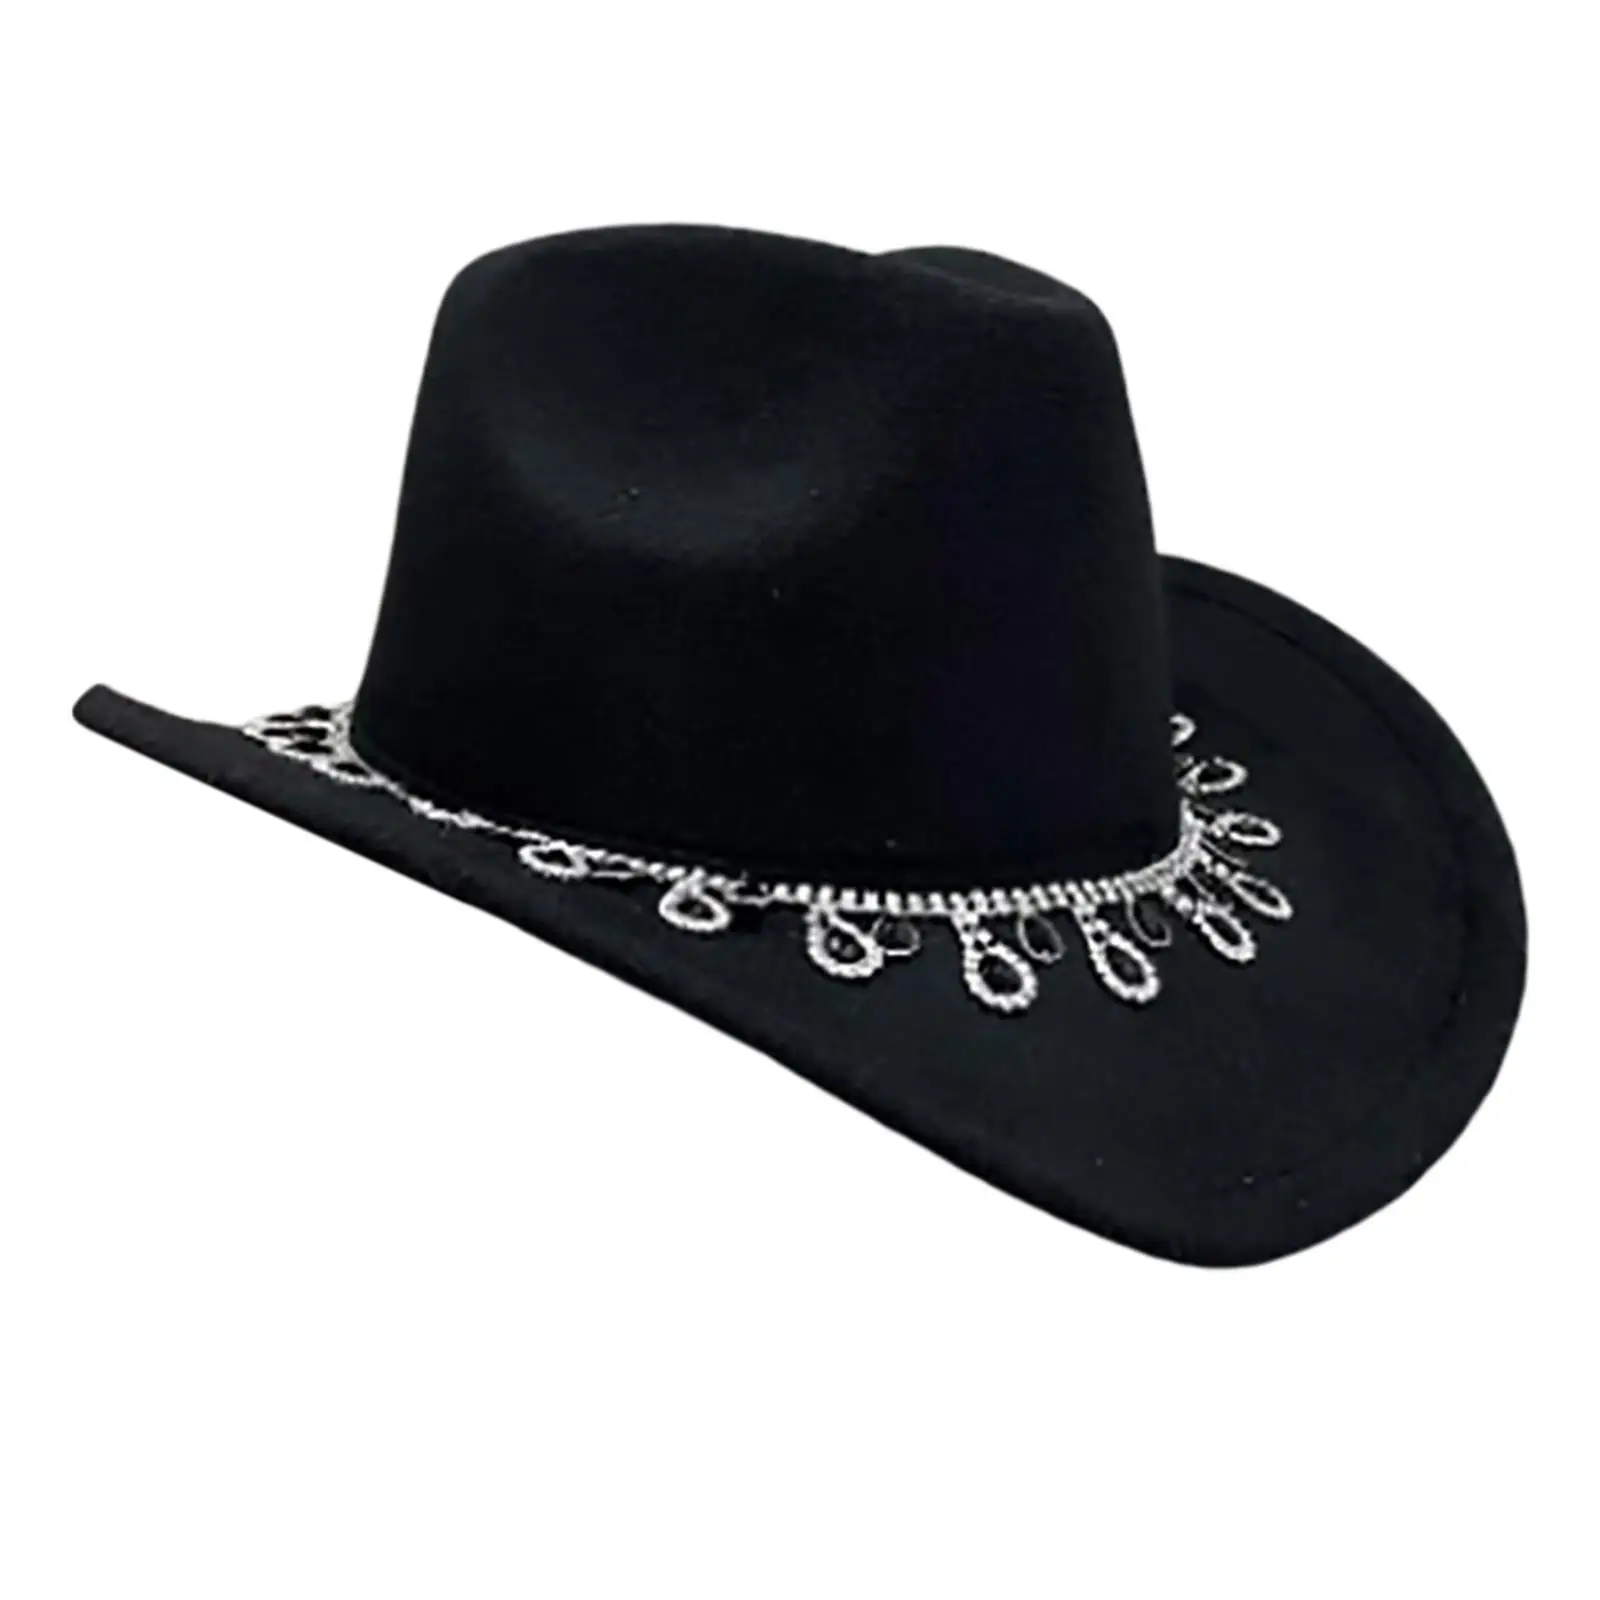 Classic Western Cowboy Hat Props Costume Accessories Wide Brim Cosplay for Unisex Teens Fishing Beach Dress up